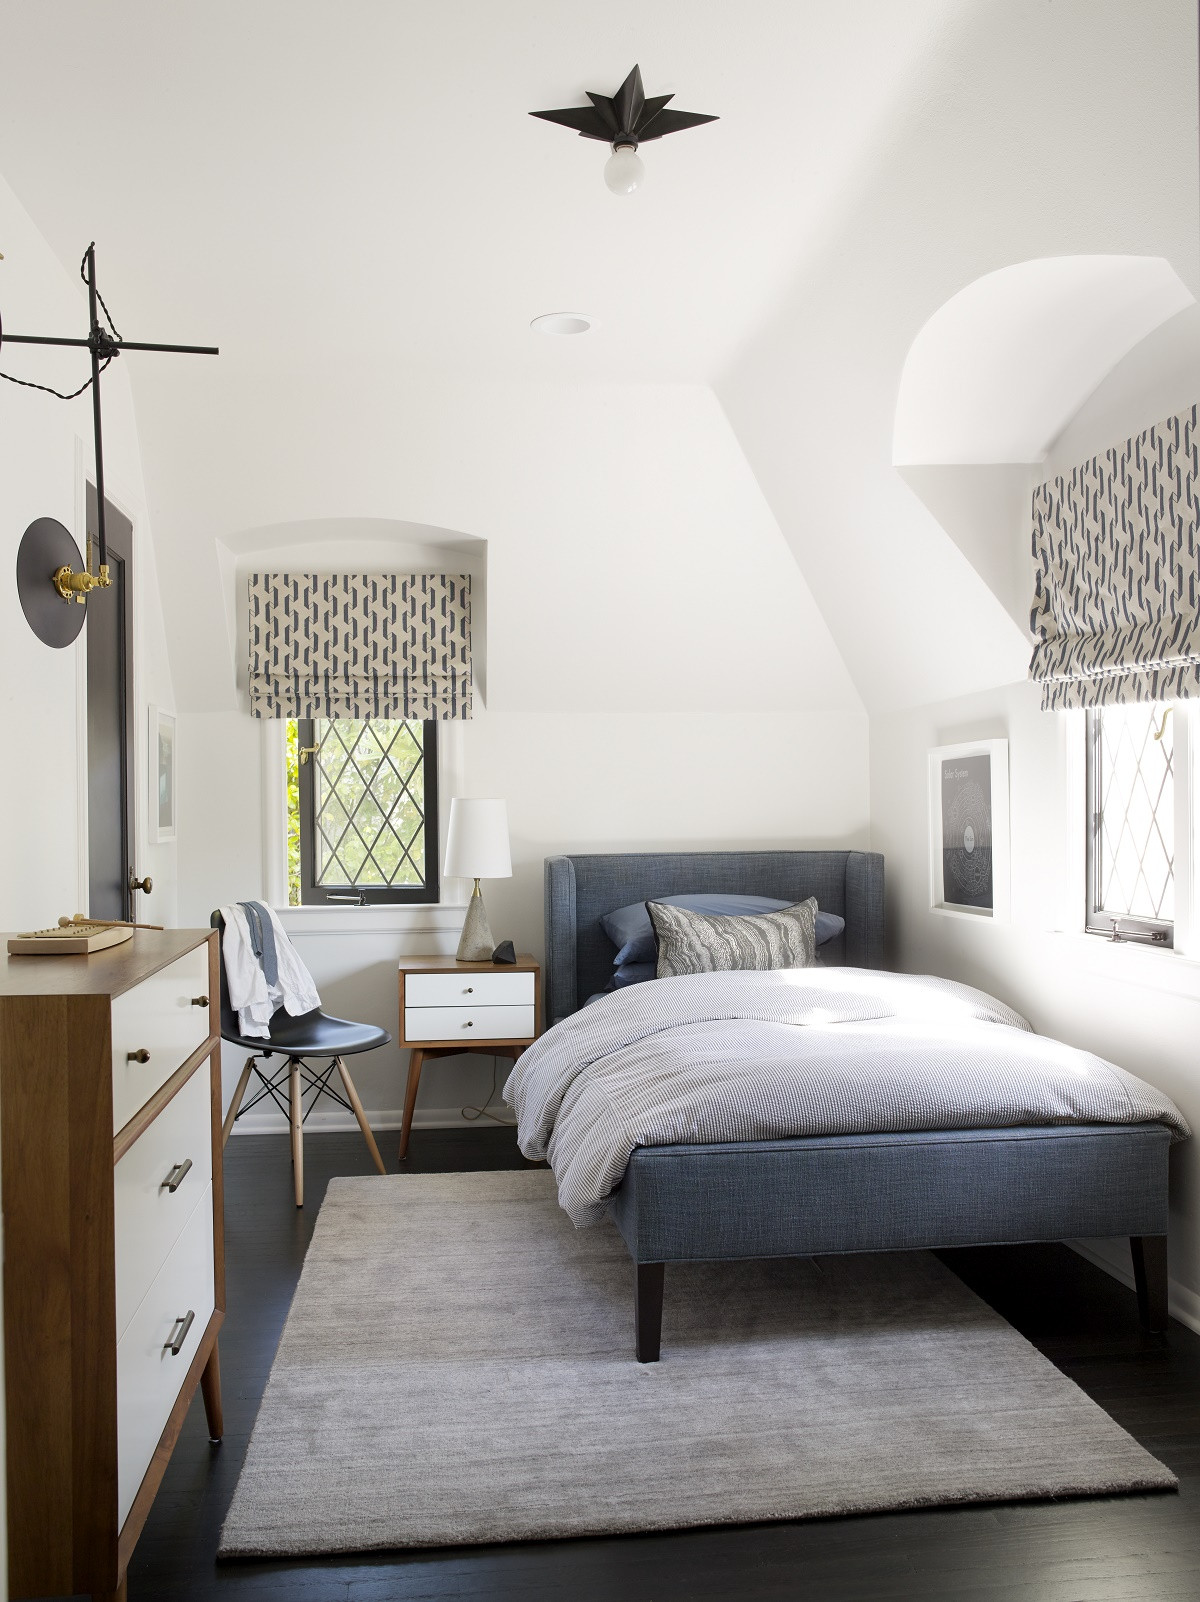 Kids Small Bedroom Ideas
 Steal This Look His and Hers Mid Century Inspired Kids